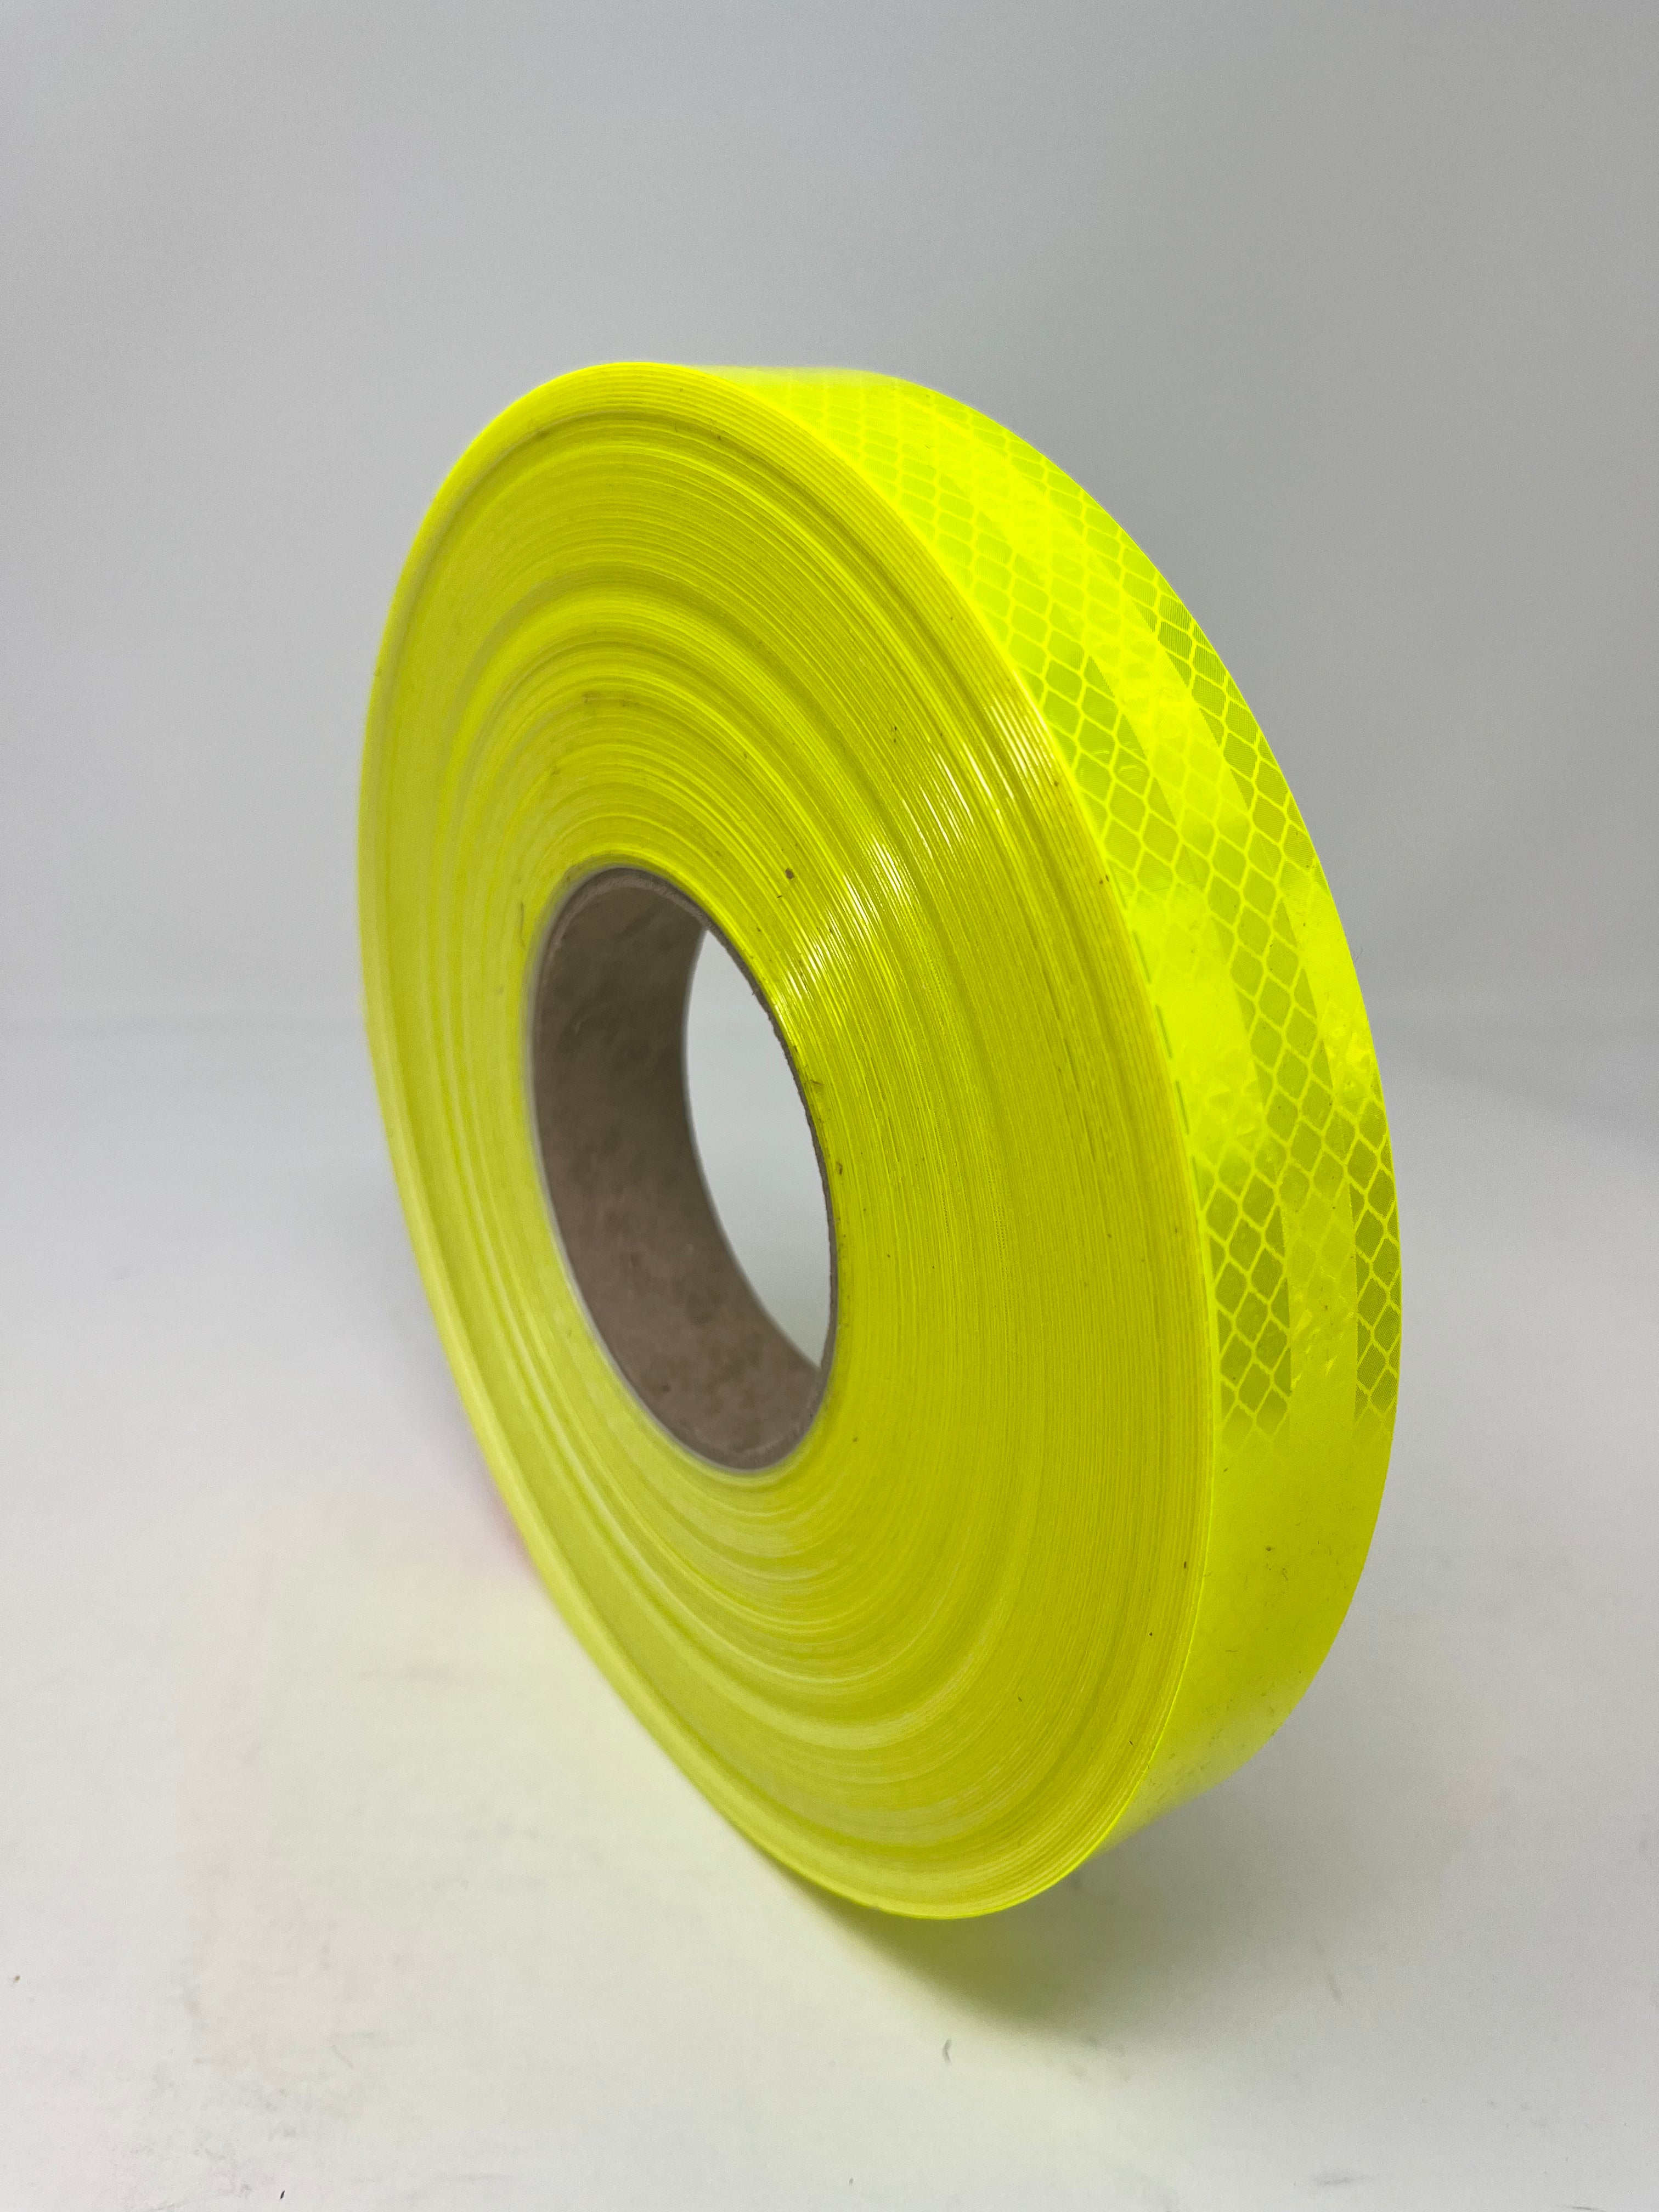 1" x 150' Roll 3M Reflective Tape - Fluorescent Yellow, Green- SPECIAL OFFER - BOGO 50% Off - Add 2 to Cart